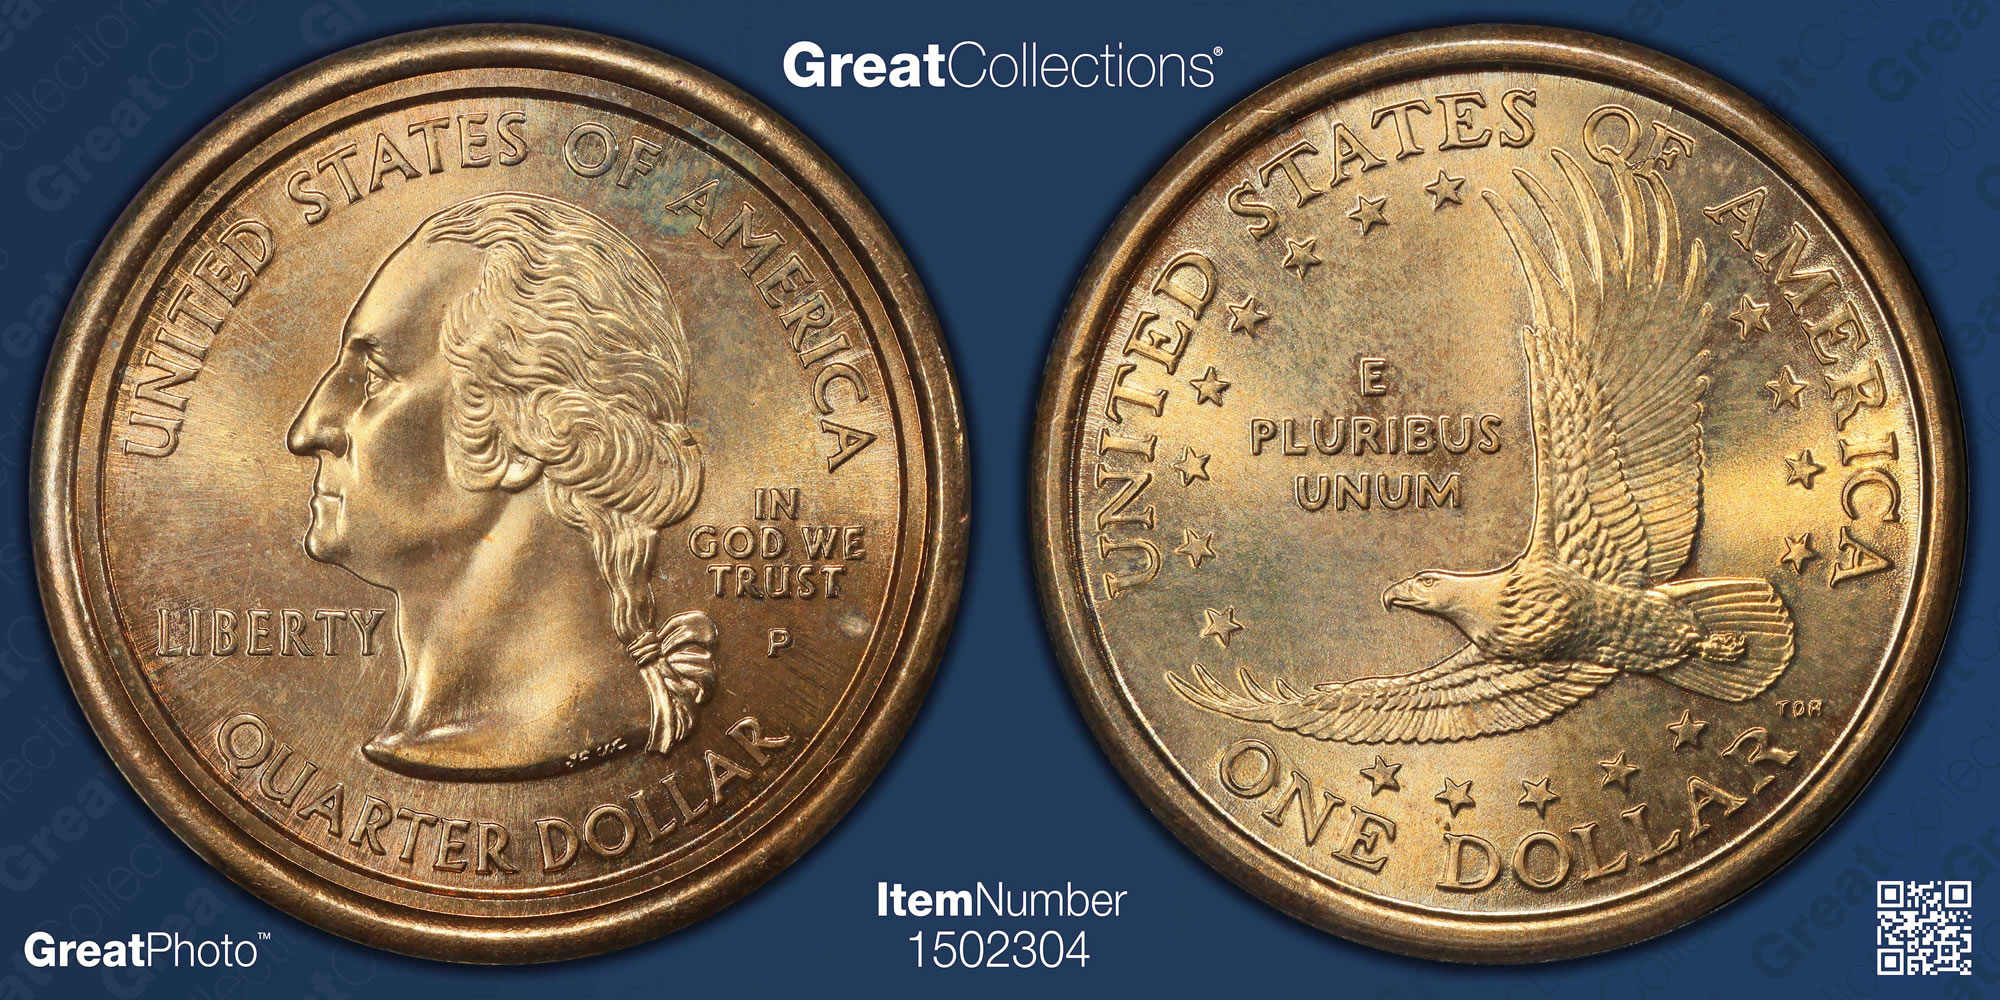 Rare U.S. Mint $1/25c Error in GreatCollections Auction